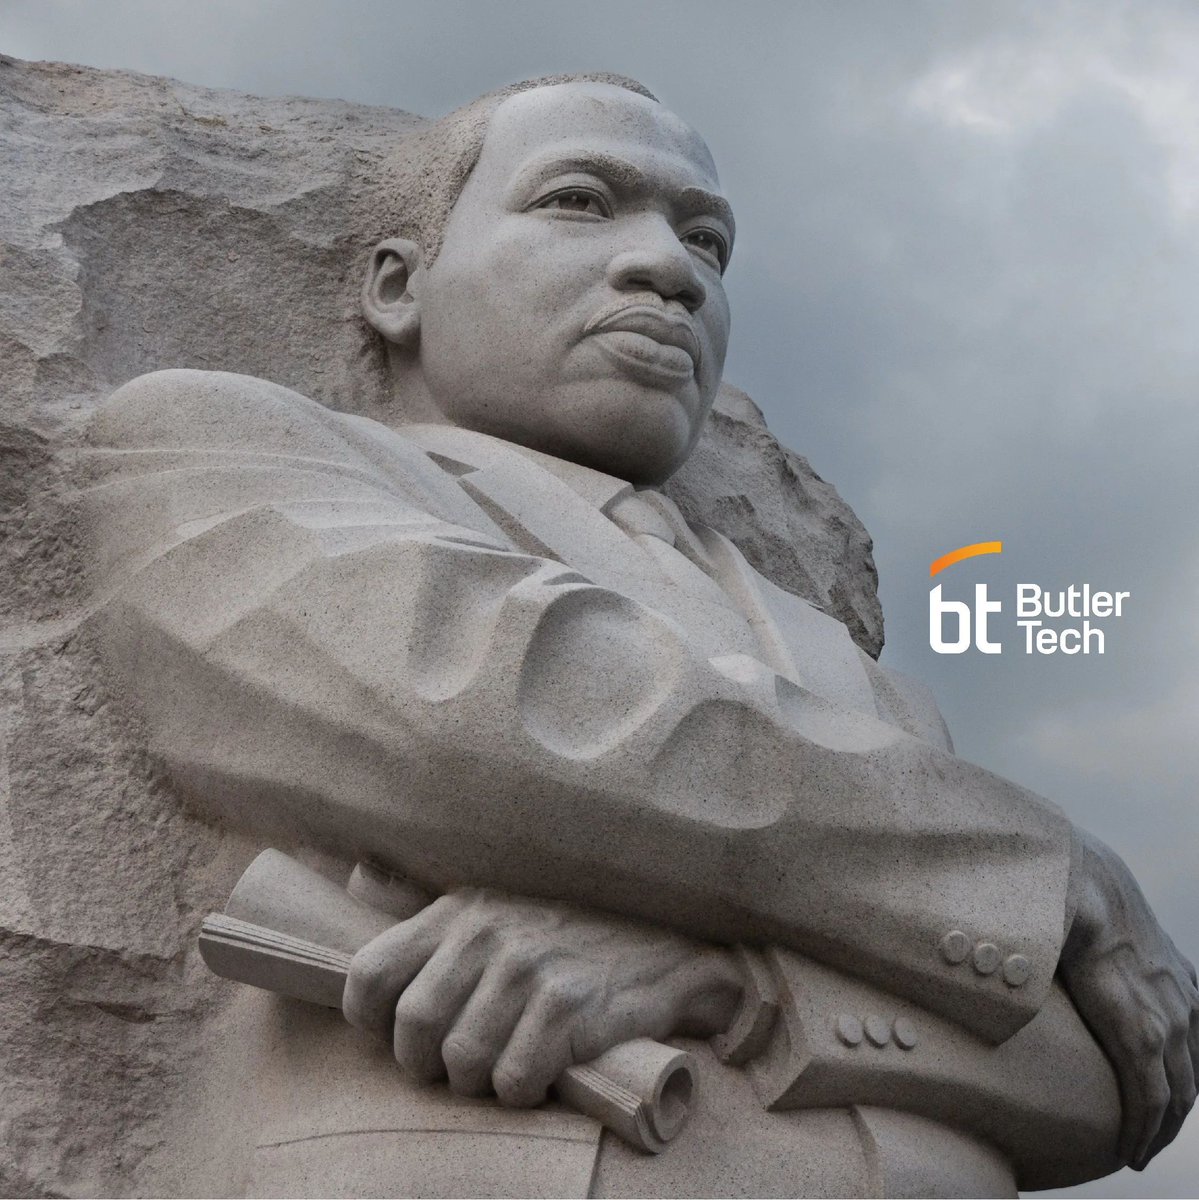 Martin Luther King Day is observed annually on the 3rd Monday of January. He was an influential civil rights leader best known for his work on racial equality and ending racial segregation in the United States. His life and achievements are remembered and celebrated on this day.